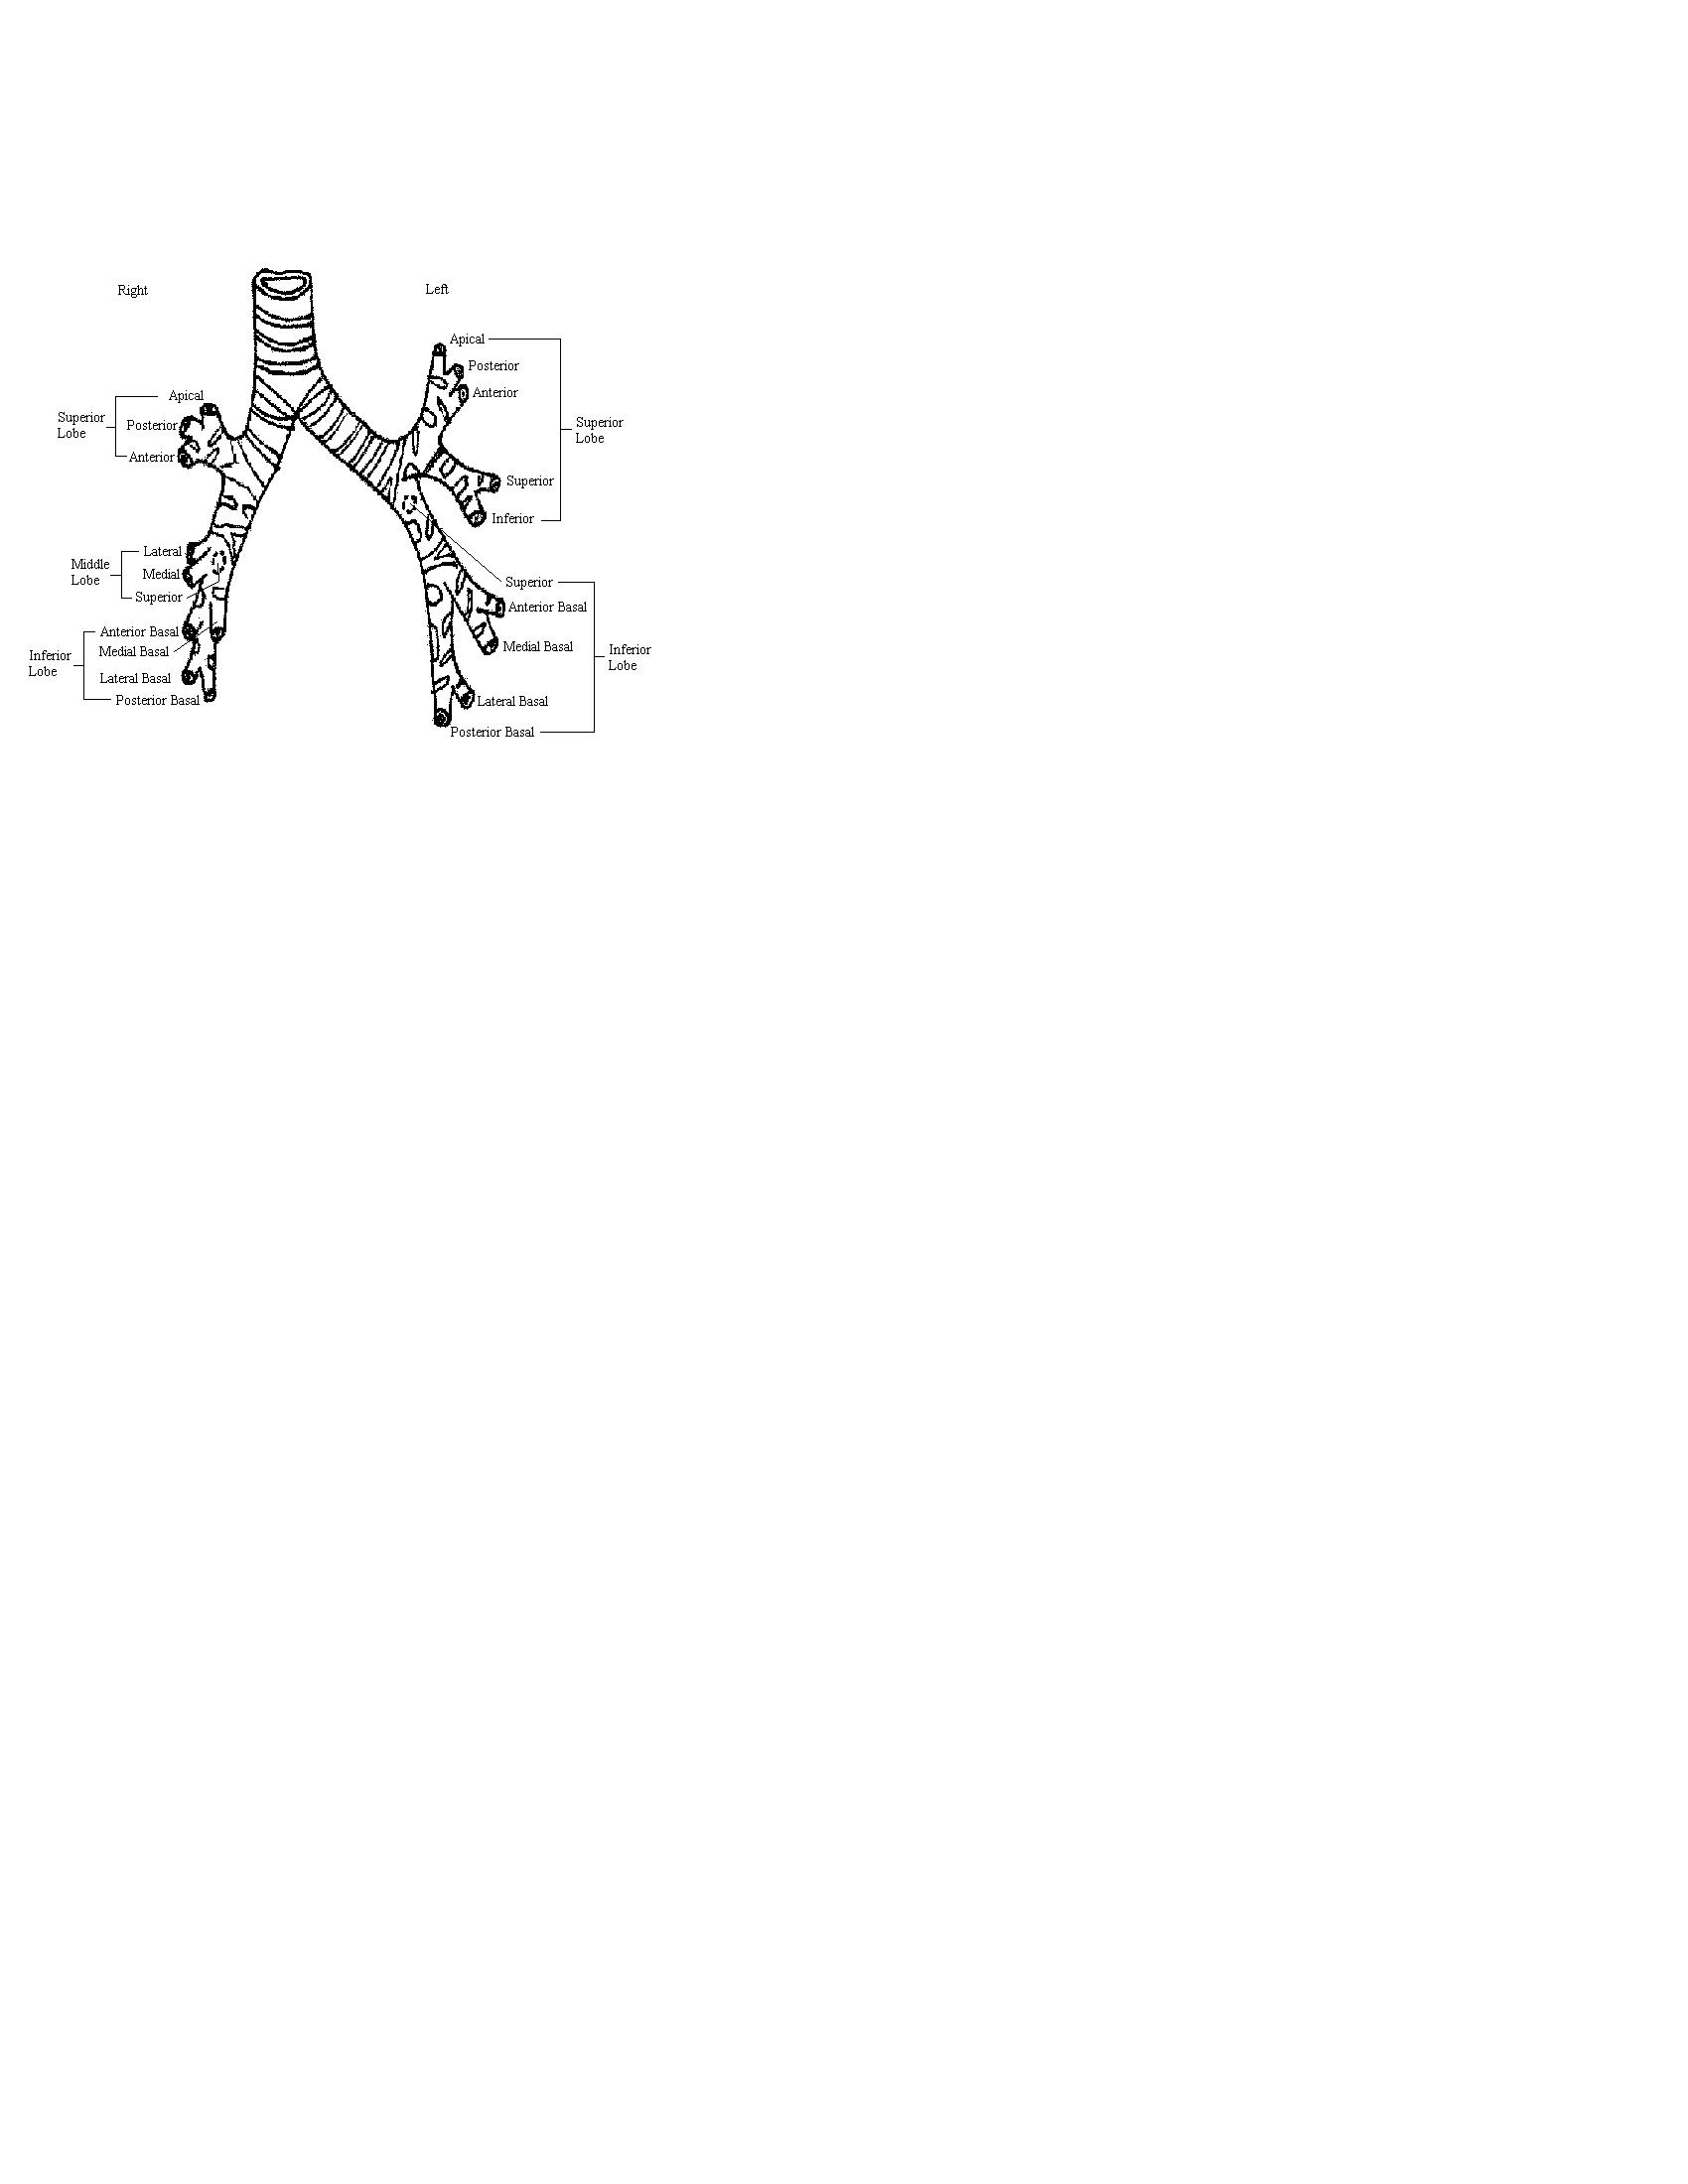 a completed diagram of the bronchial tree indicating the names of the brochopulmonary segments